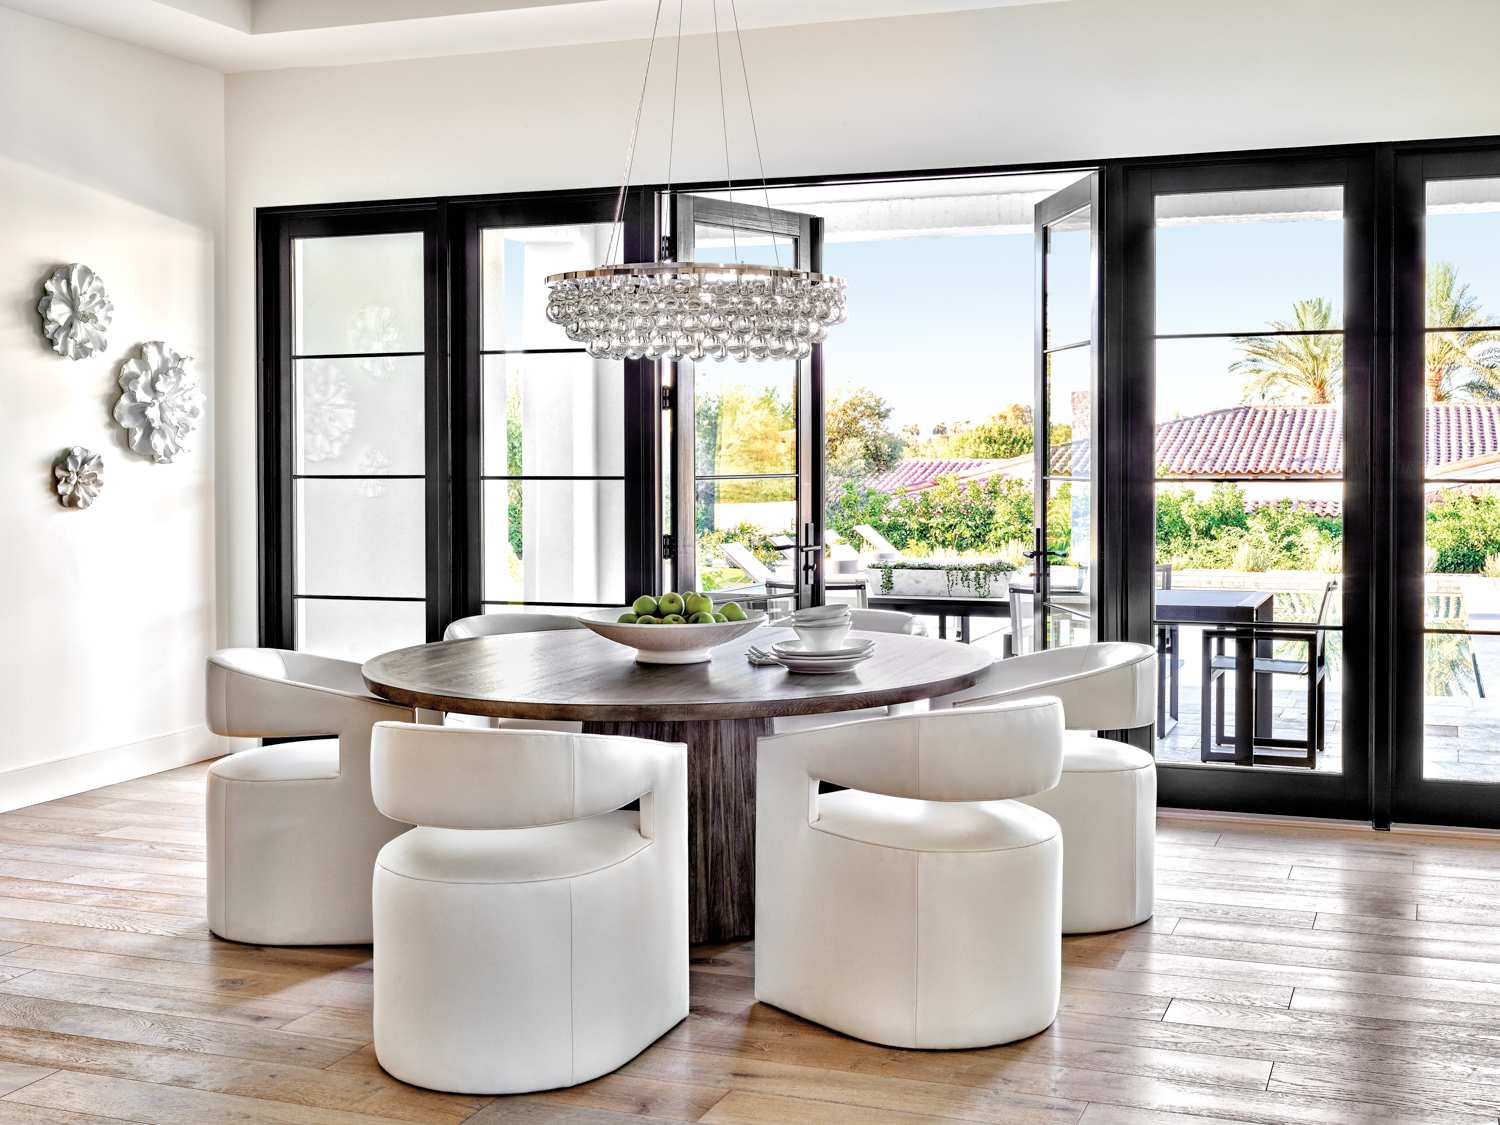 A breakfast nook with glass-and-steel...